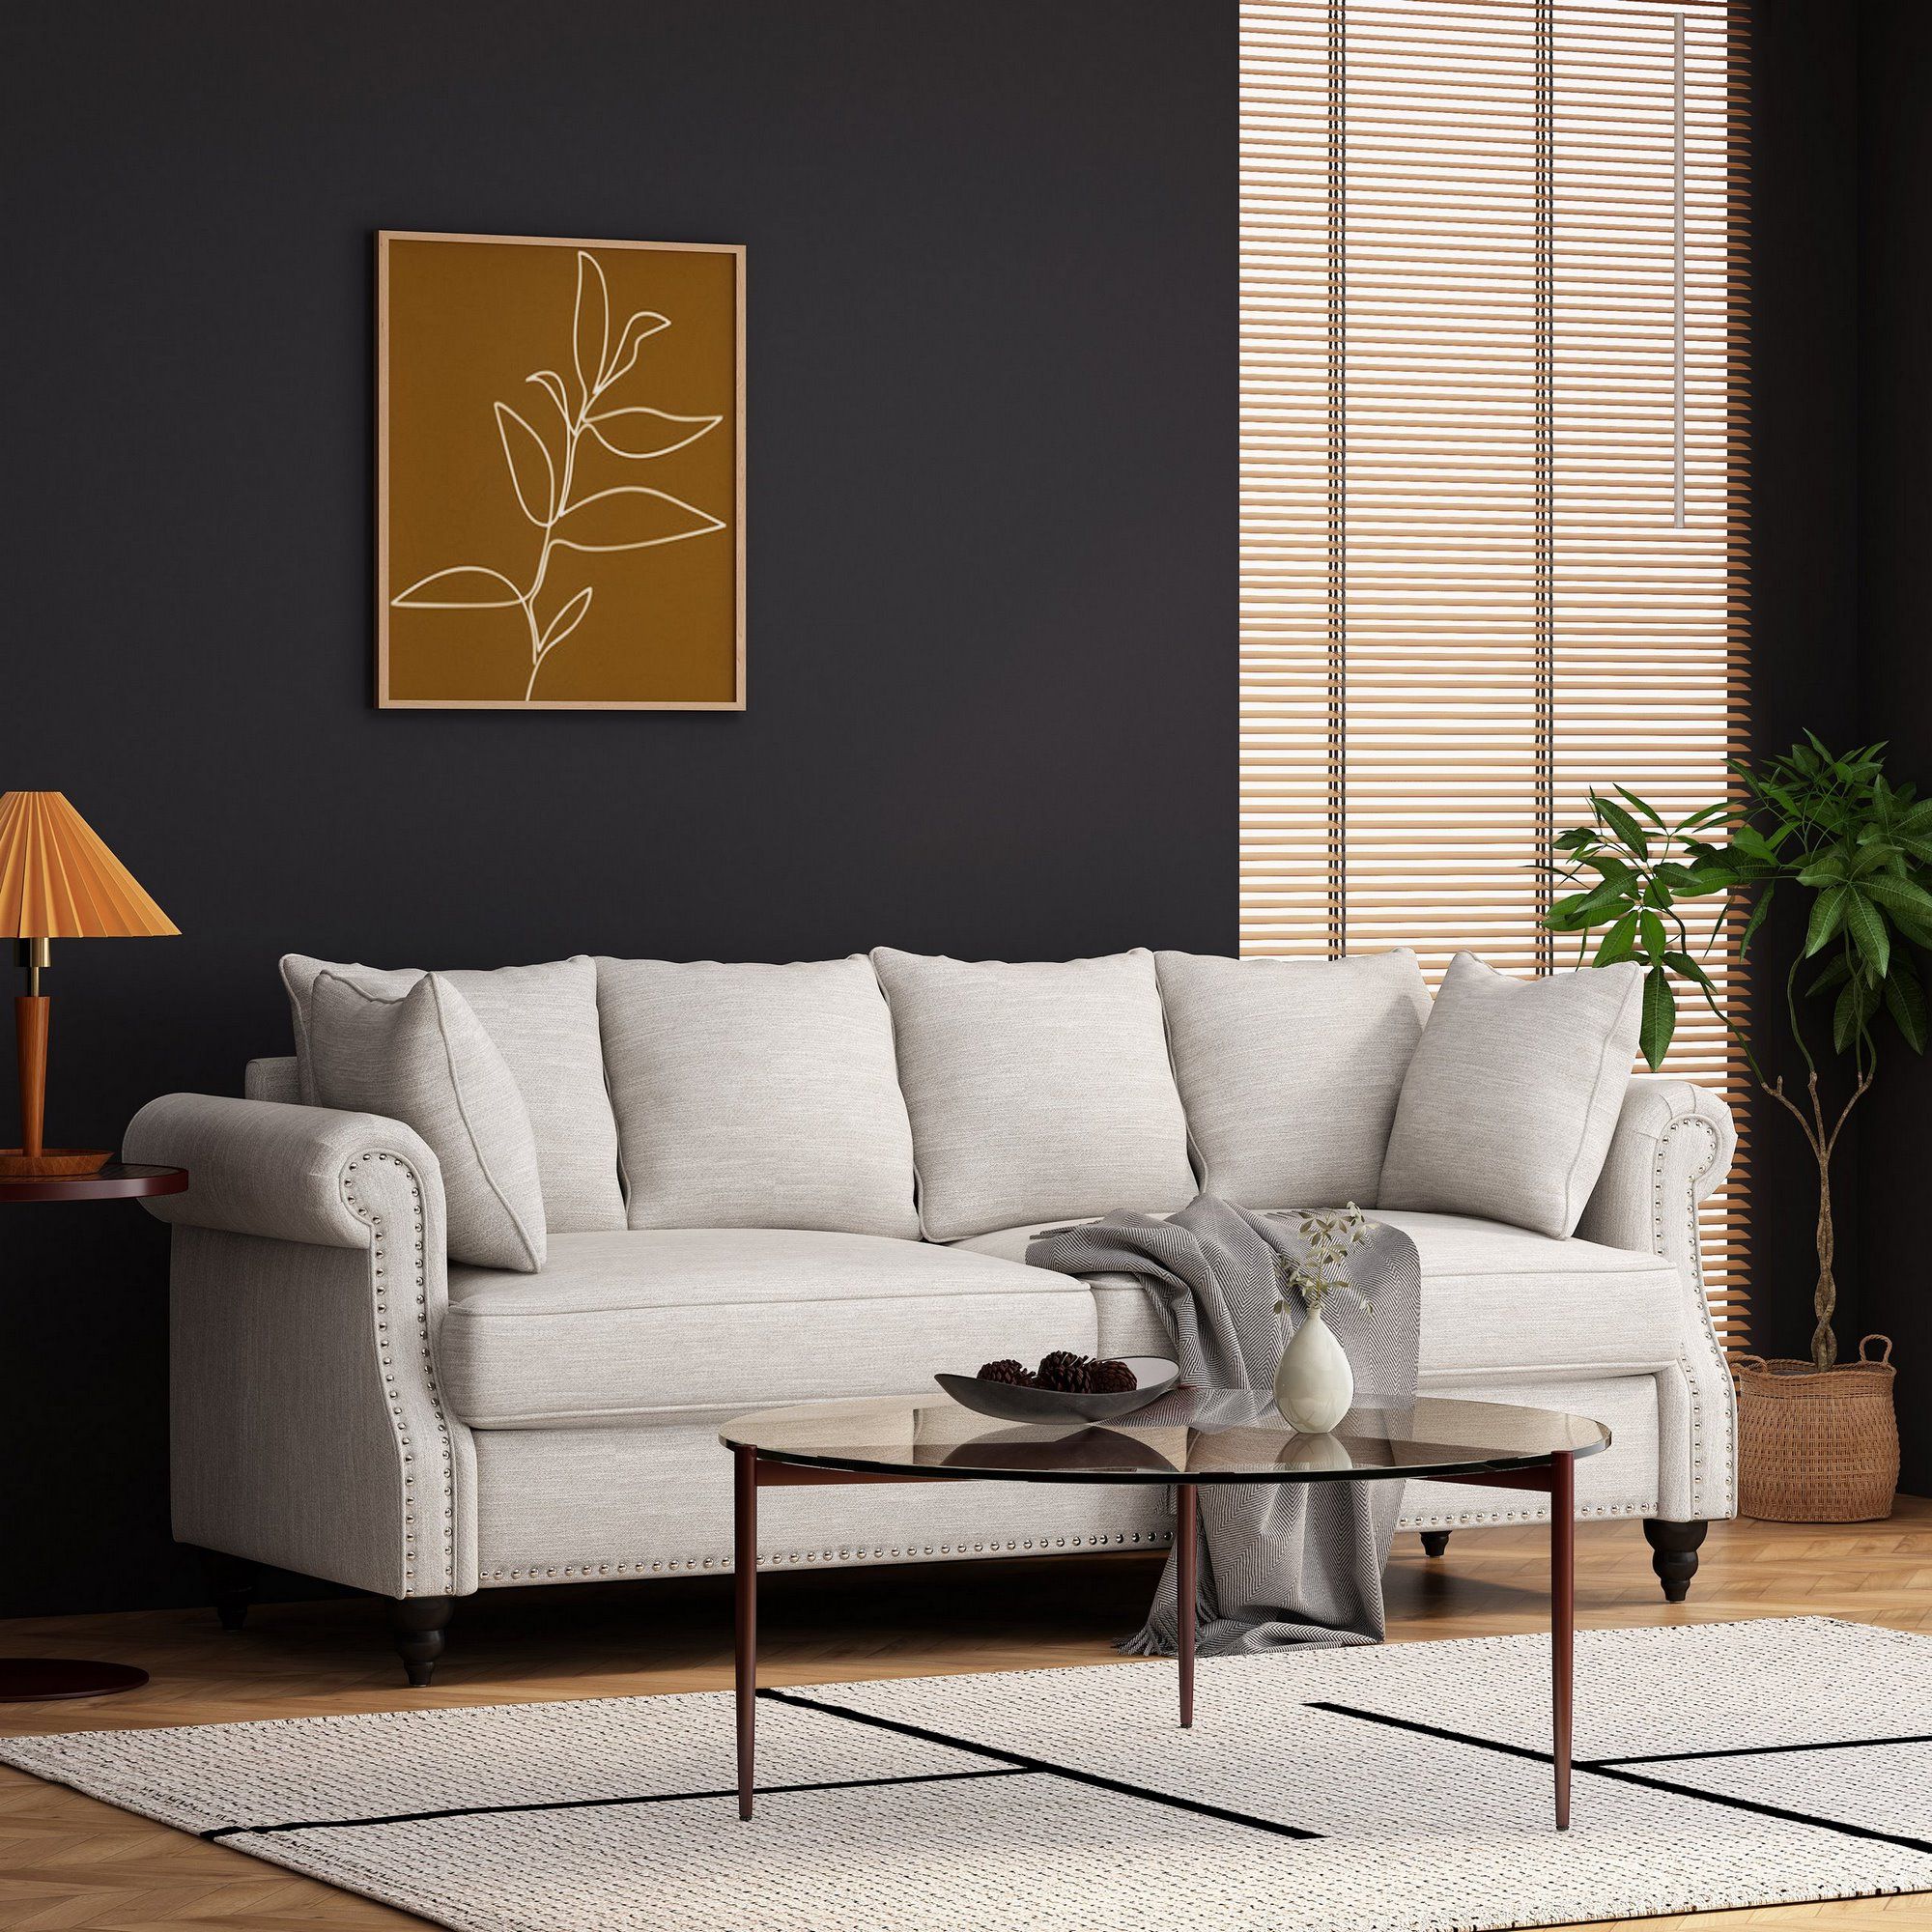 Manbow Contemporary Fabric Pillowback 3 Seater Sofa With Nailhead Trim,  Beige And Dark Brown Intended For Pillowback Sofa Sectionals (View 8 of 20)